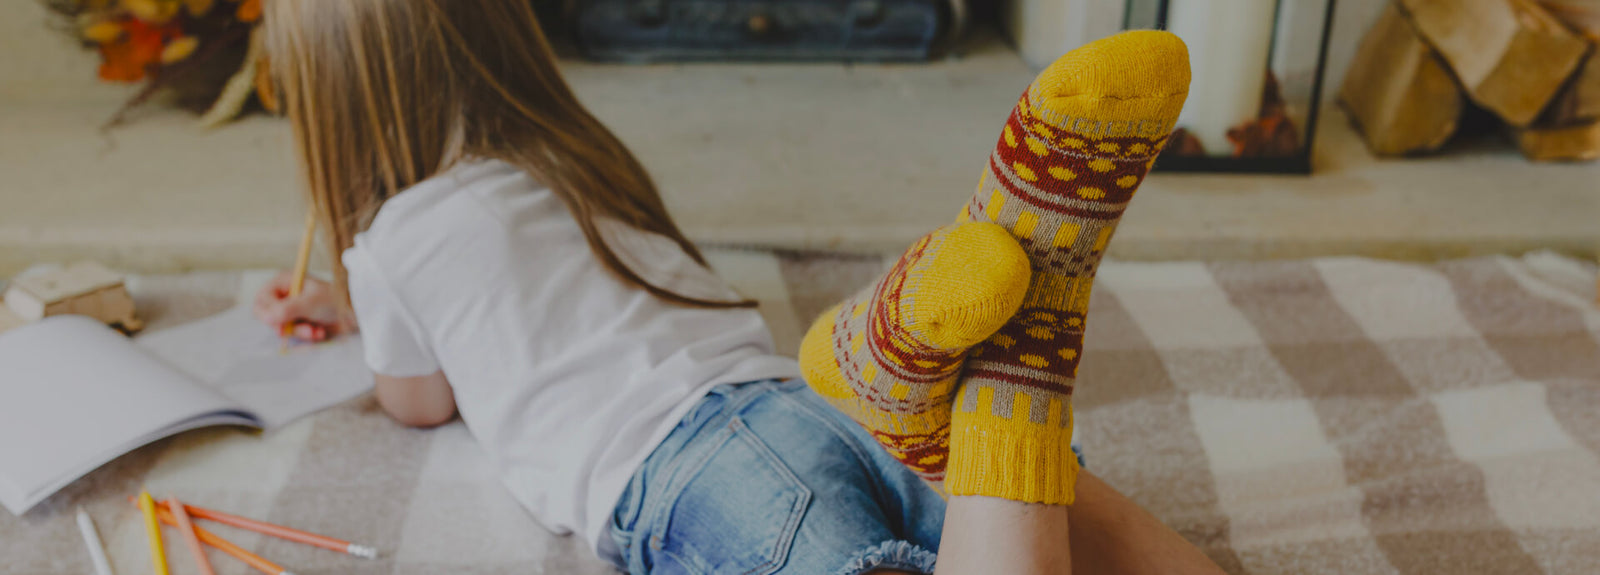 How to Choose the Right Kids Socks for Your Little Ones